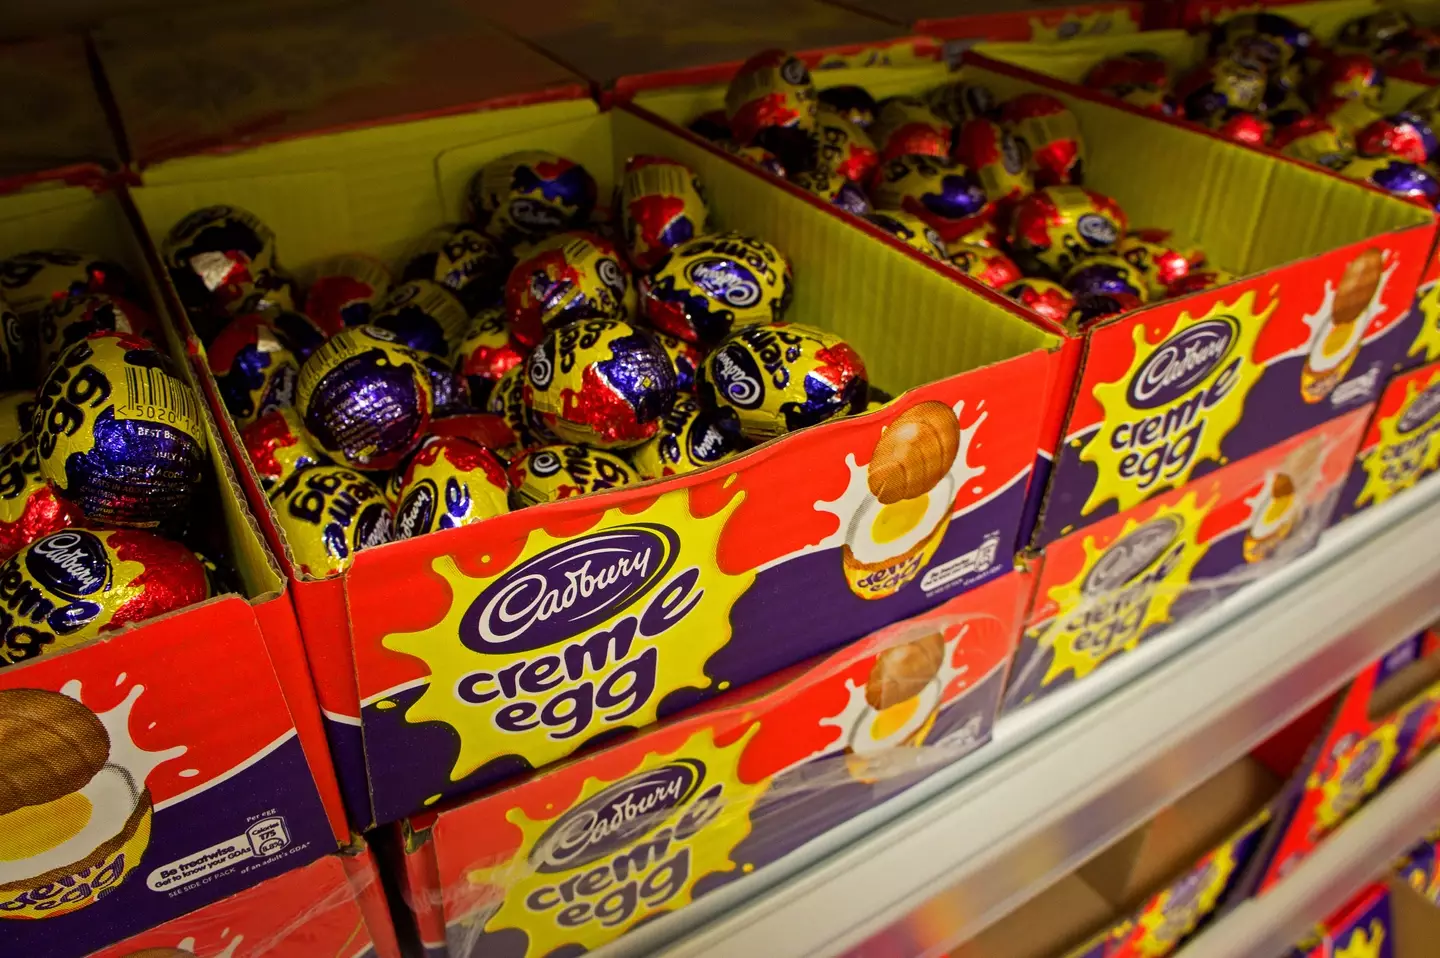 Lidl has slashed the price of their Cadbury's Creme Eggs by 71 per cent.